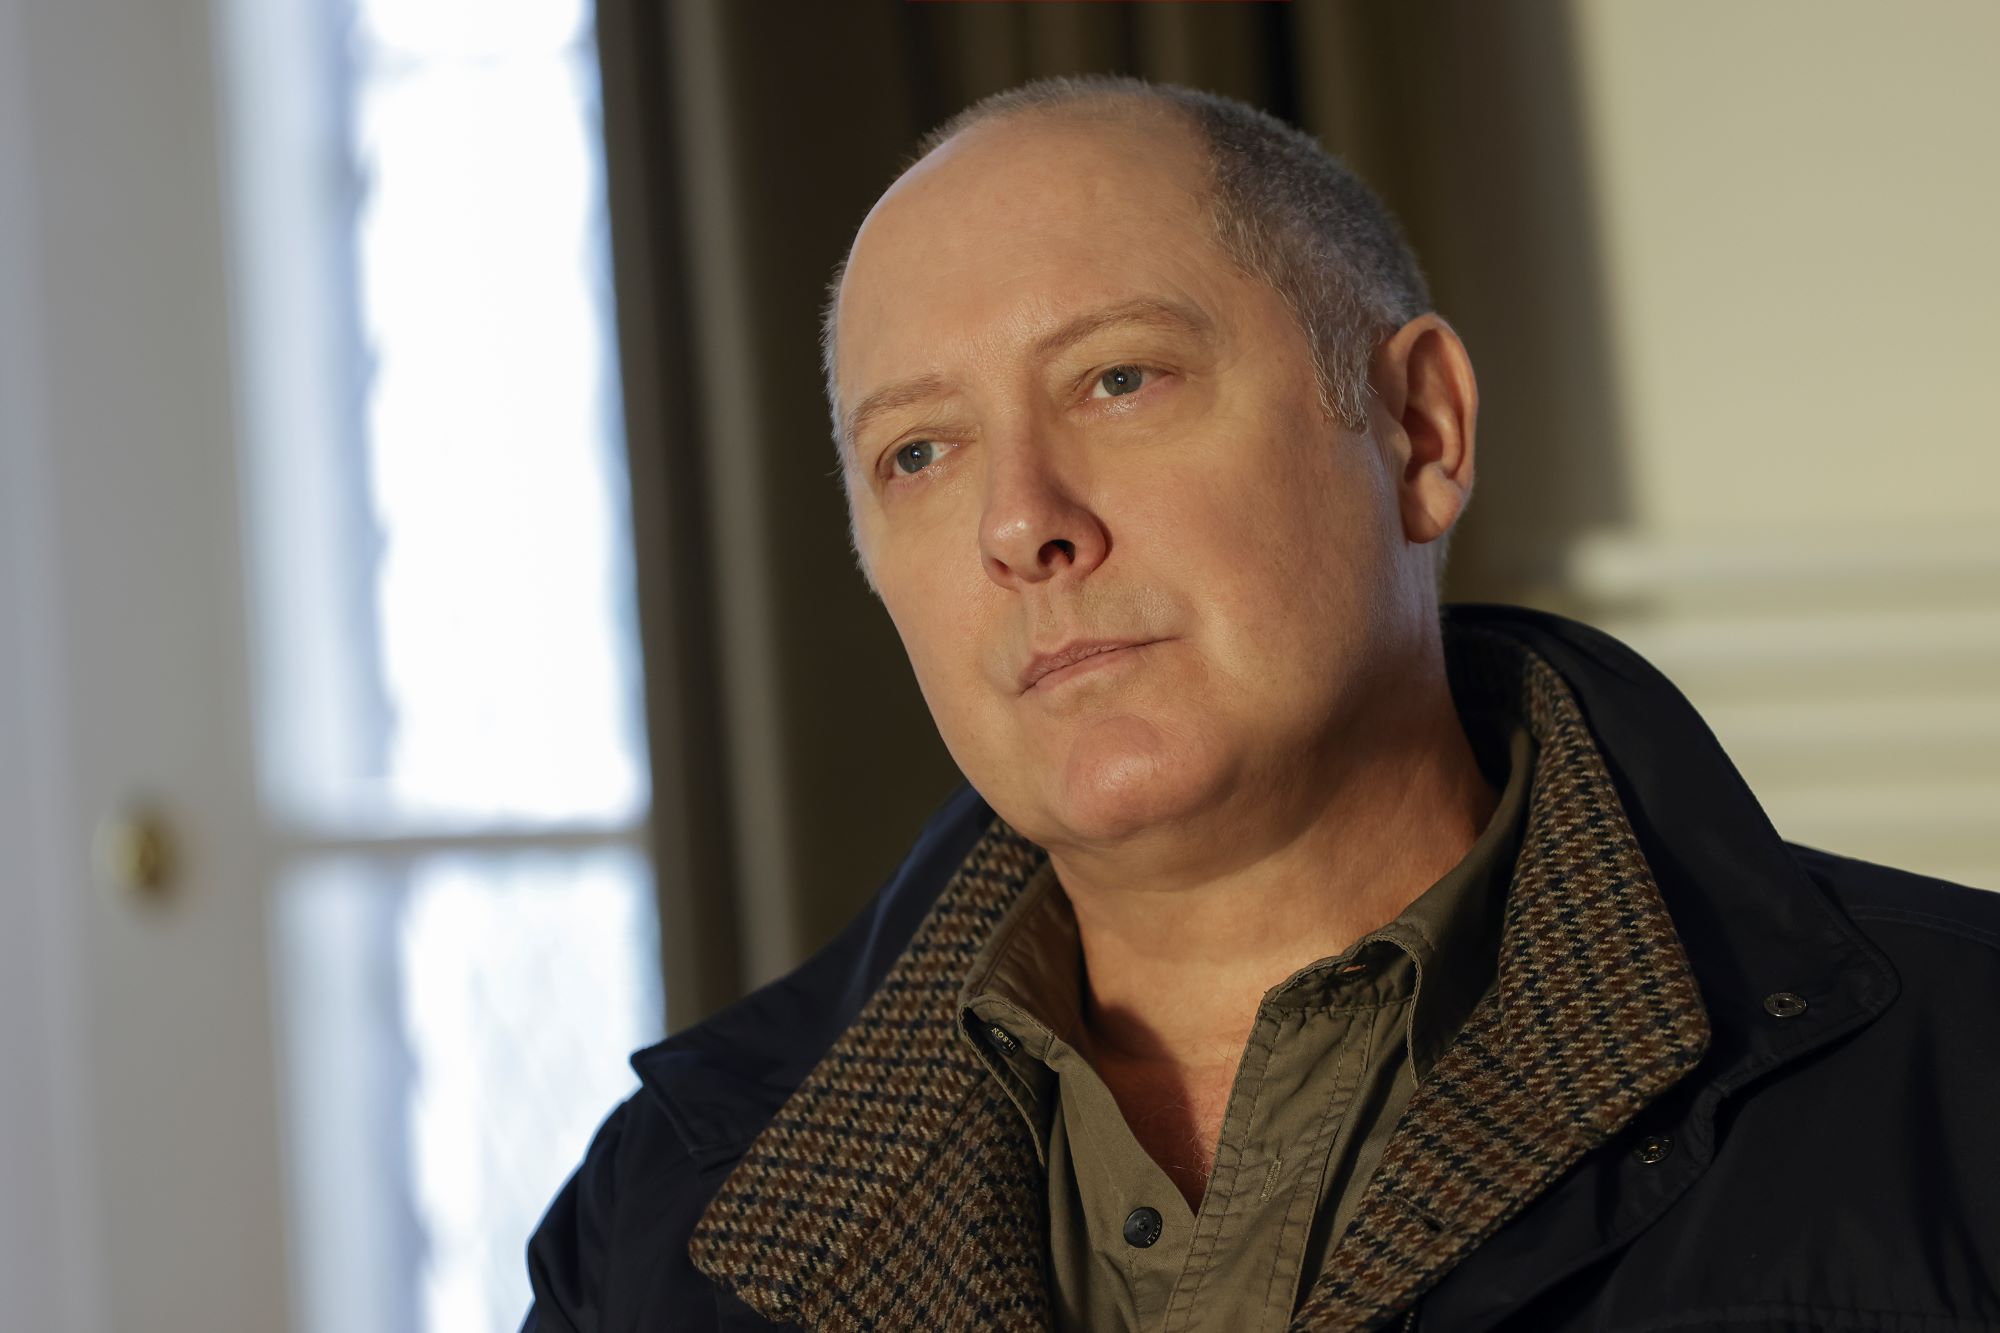 'The Blacklist' Season 9, which airs a new episode tonight, Dec. 9, stars James Spader as Raymond 'Red' Reddington. In the photo, Spader, in character as Red, wears a black coat over a brown and black jacket and a green button-up shirt.